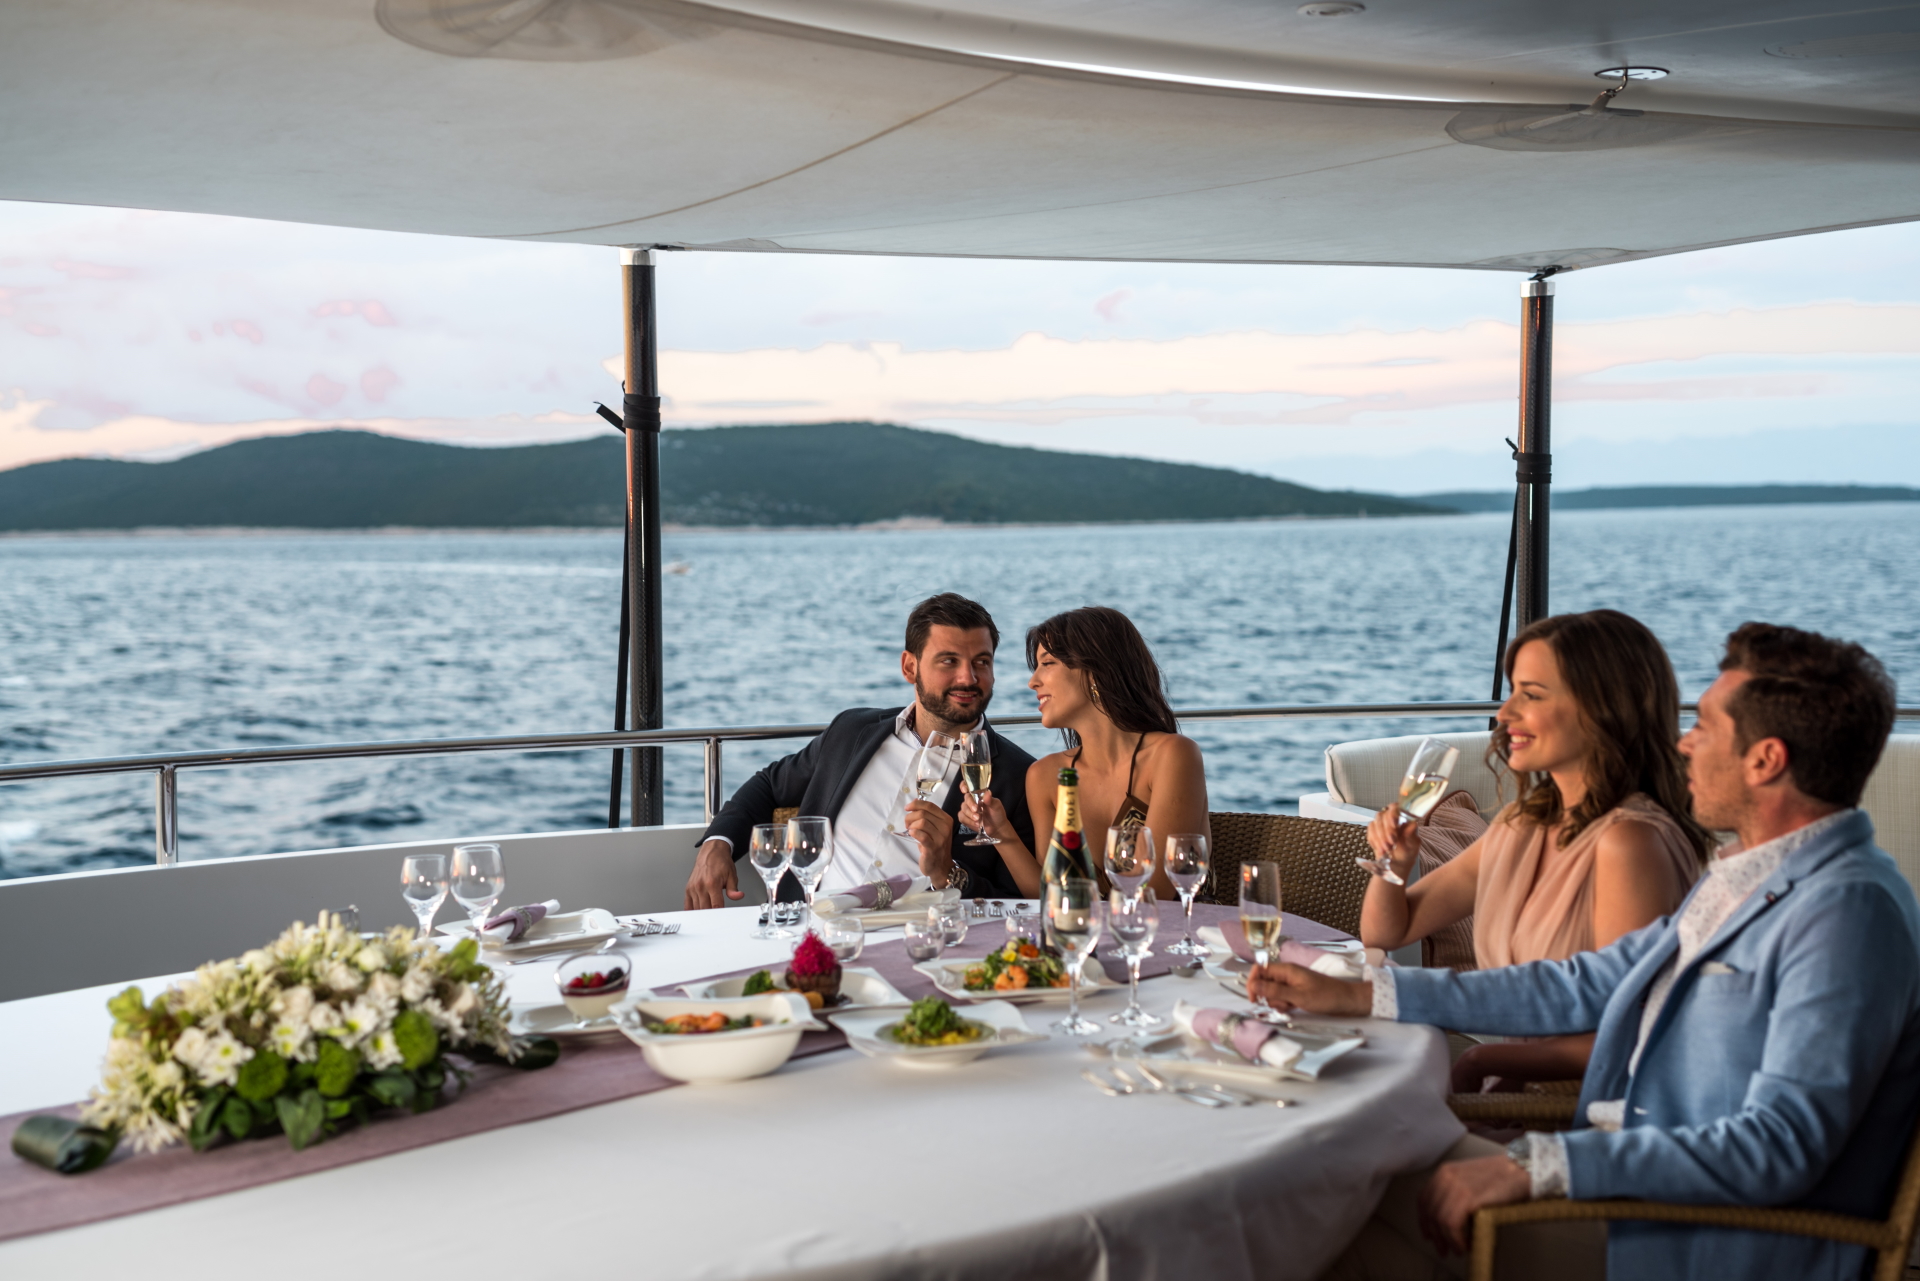 dine on a yacht guests dining